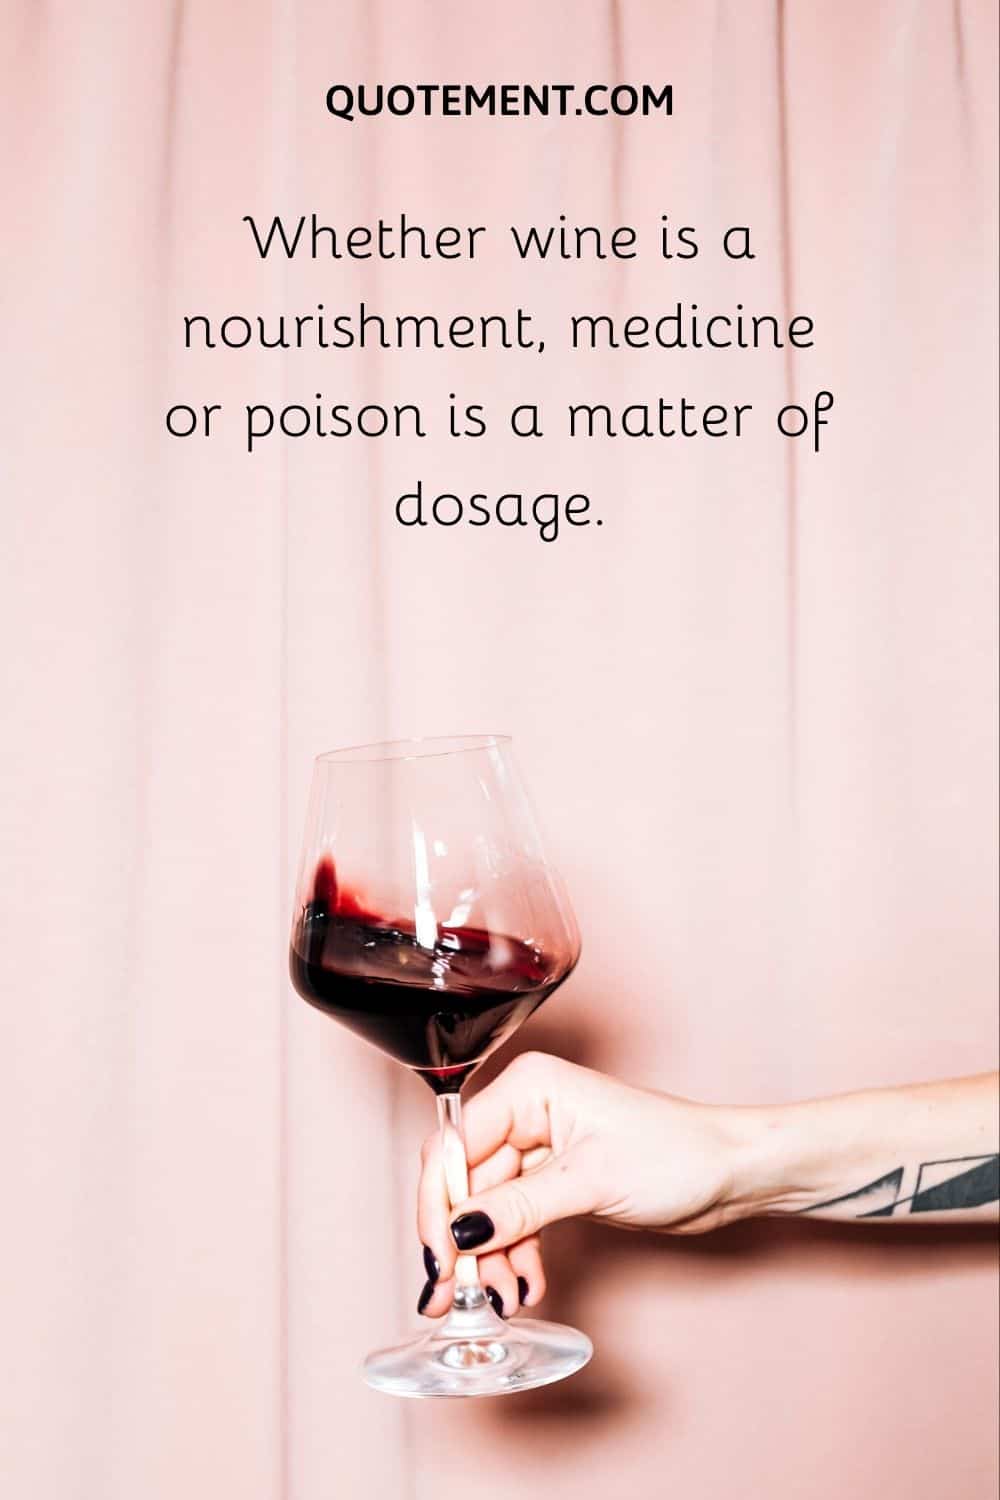 Whether wine is a nourishment